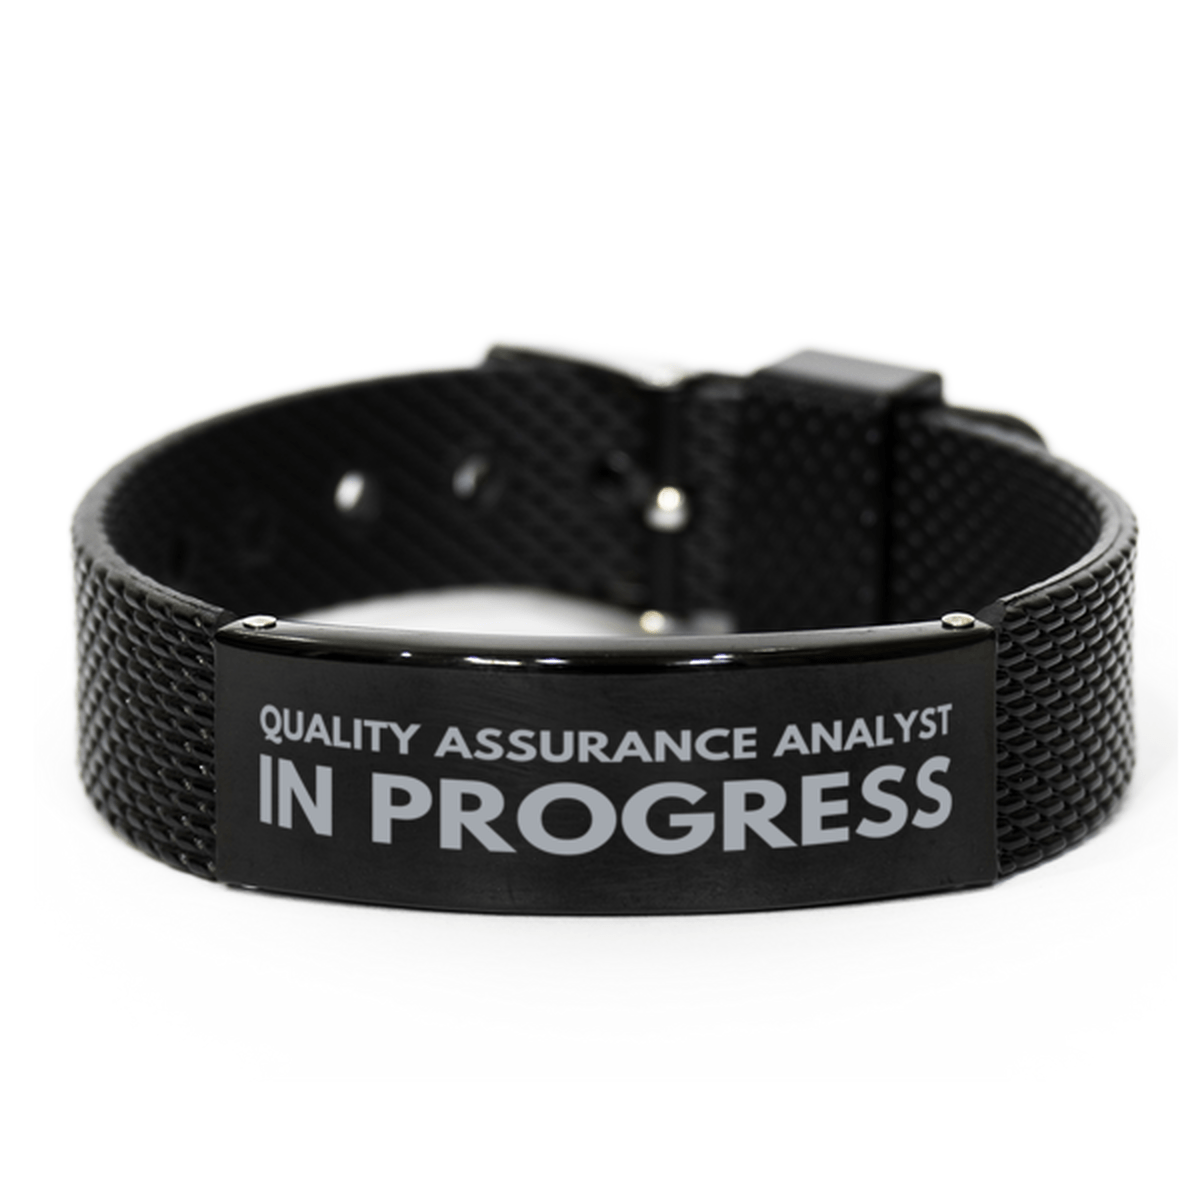 Inspirational Quality Assurance Analyst Black Shark Mesh Bracelet, Quality Assurance Analyst In Progress, Best Graduation Gifts for Students